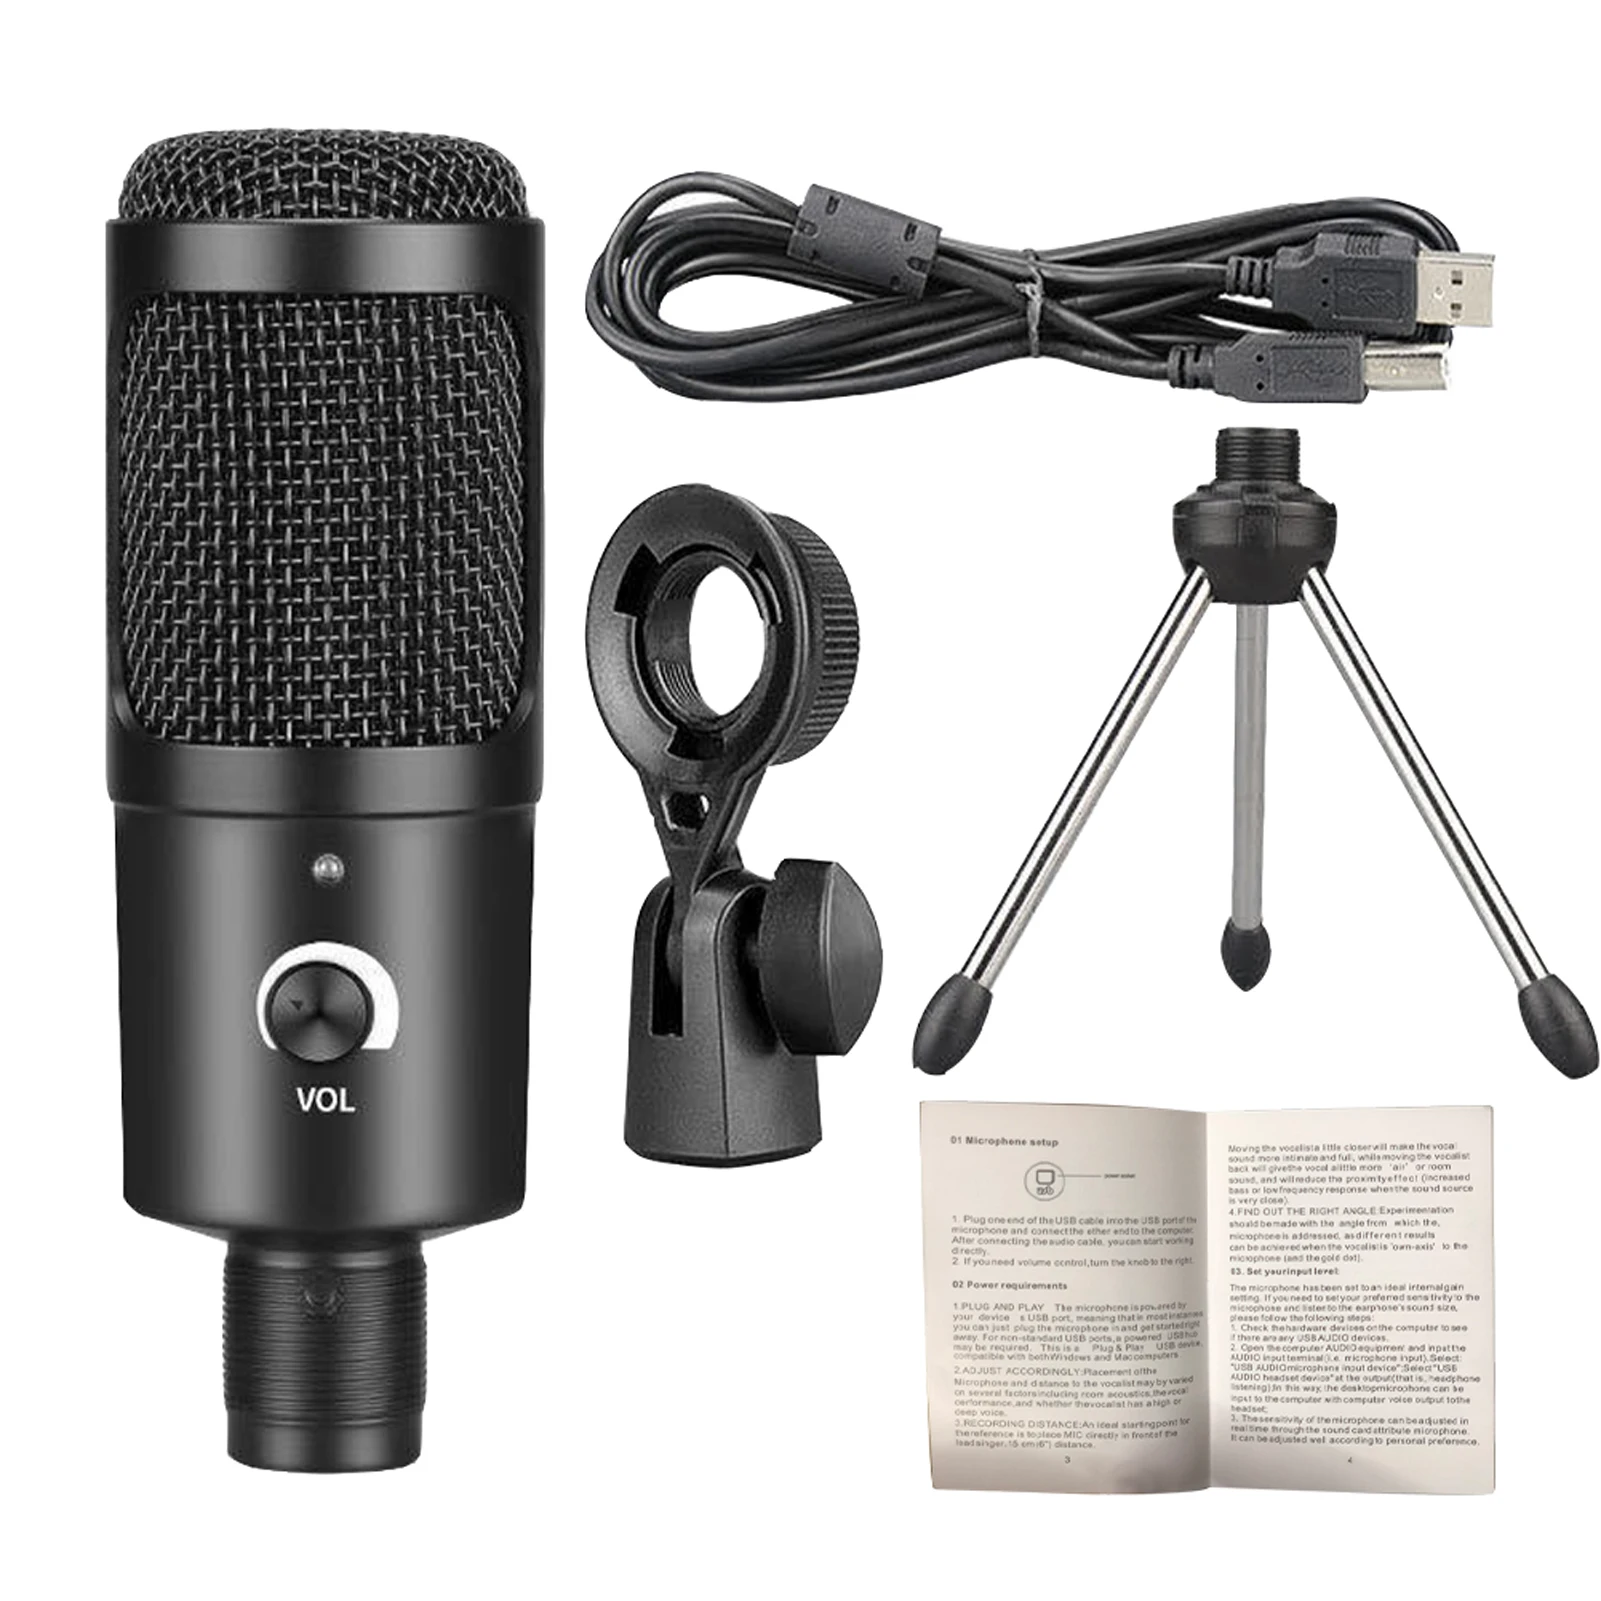 

Live Streaming USB Powered Voice Overs Condenser Microphone Kit Desktop Tripod 180 Degree Rotatable Studio Cardioid For Laptop